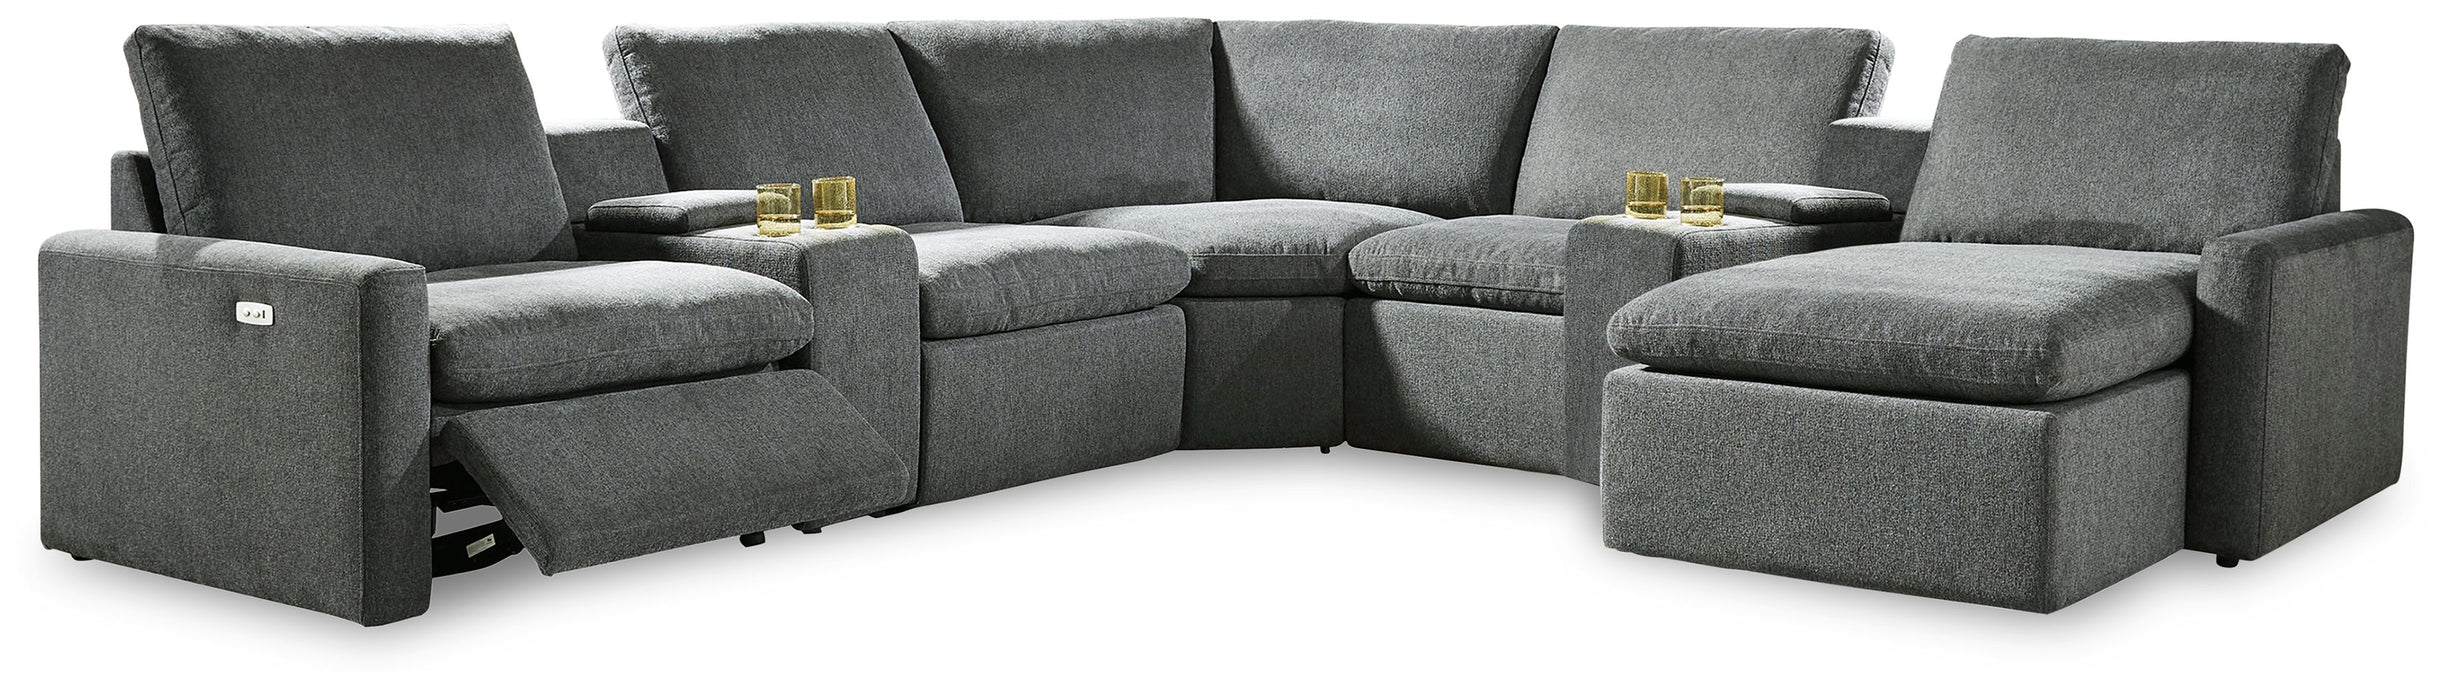 Hartsdale - Power Sectional Capital Discount Furniture Home Furniture, Home Decor, Furniture